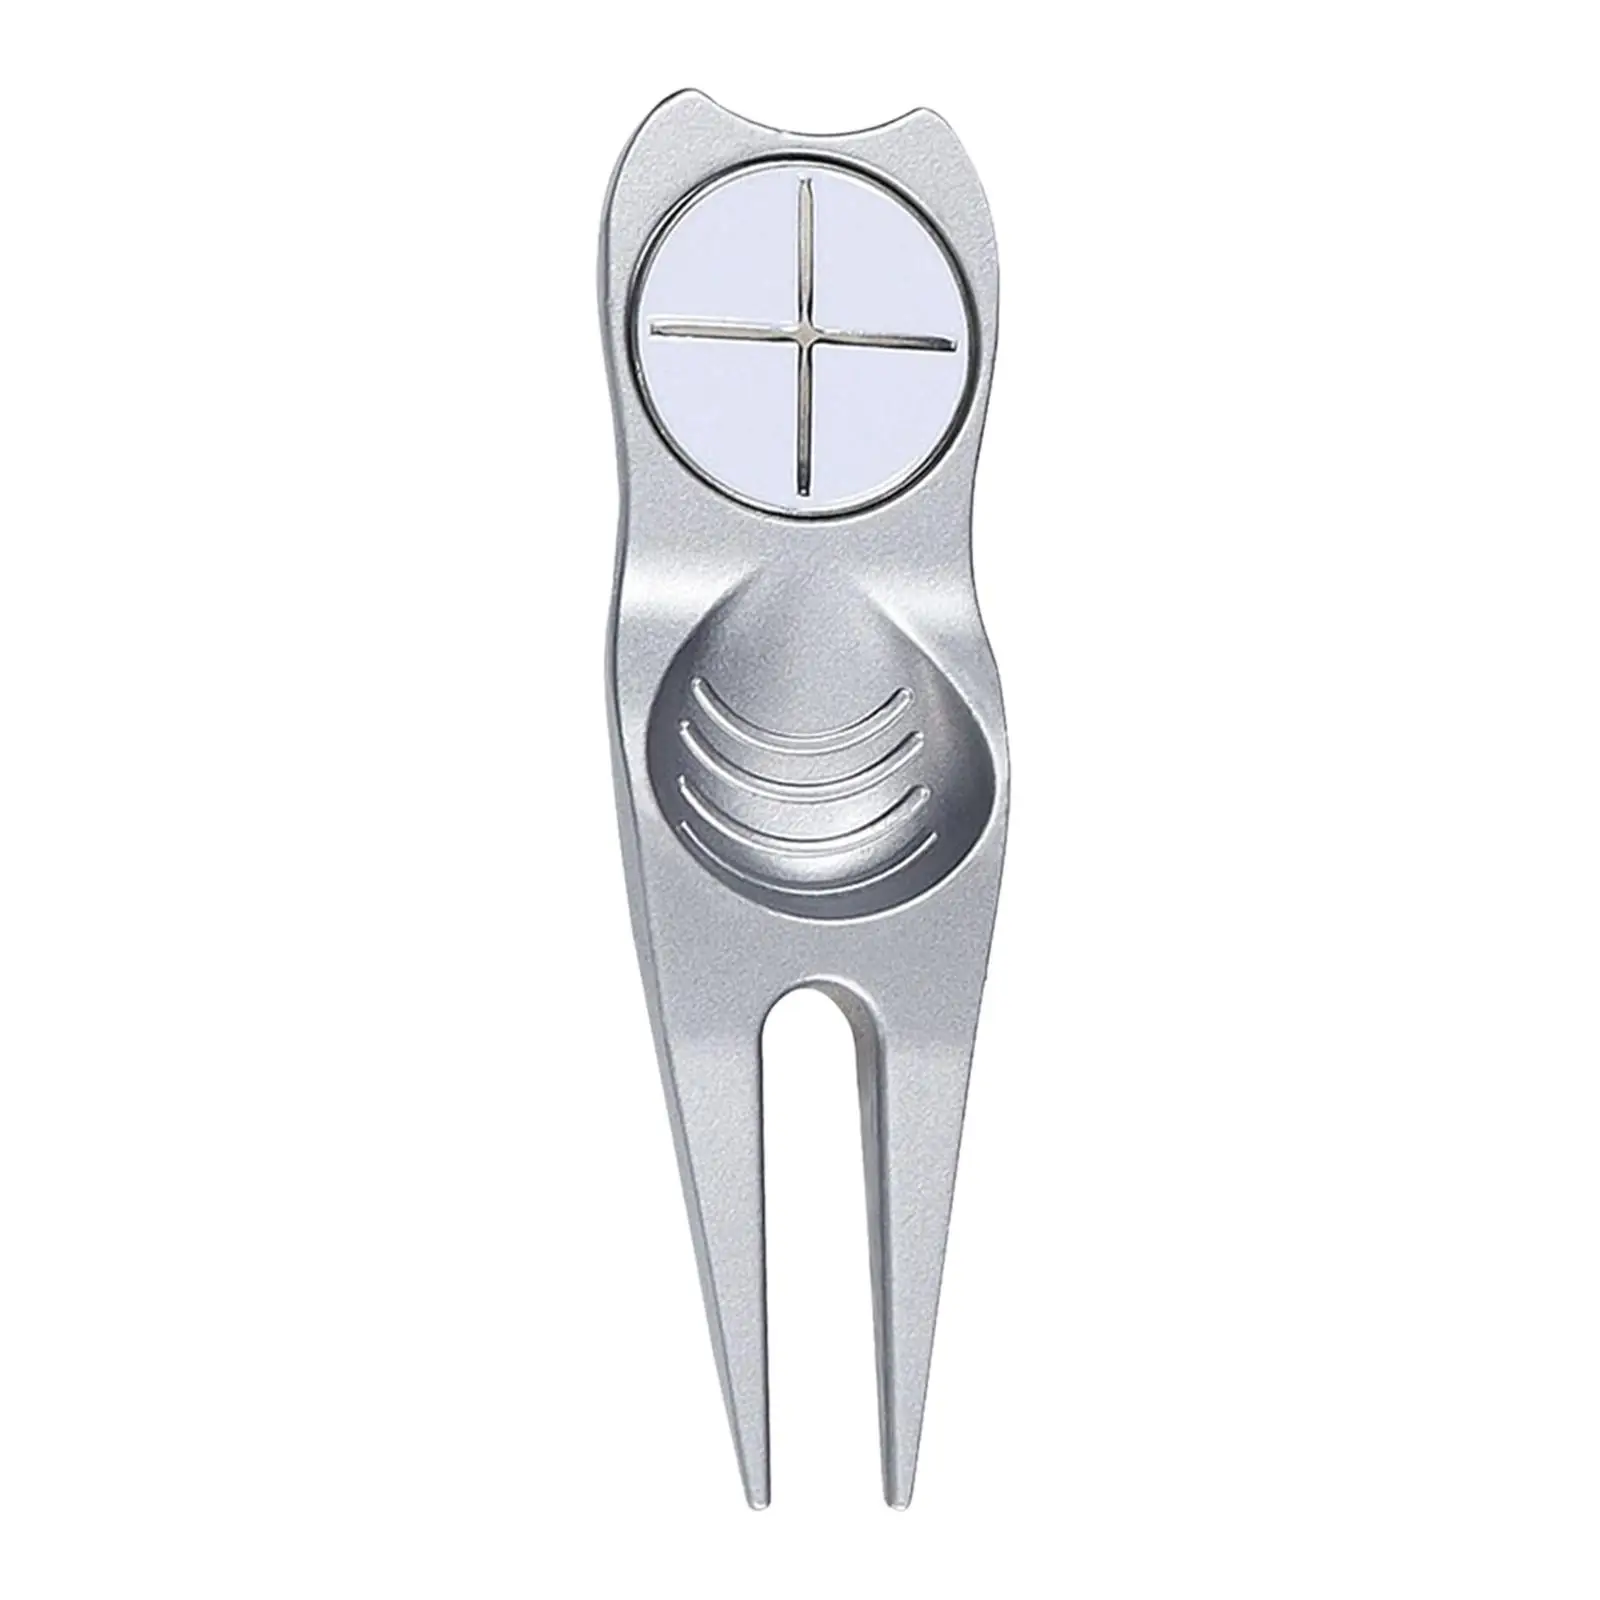 GolfTool and Ball Marker in Blue and White, Zinc Alloy Lightweight Putting Tool